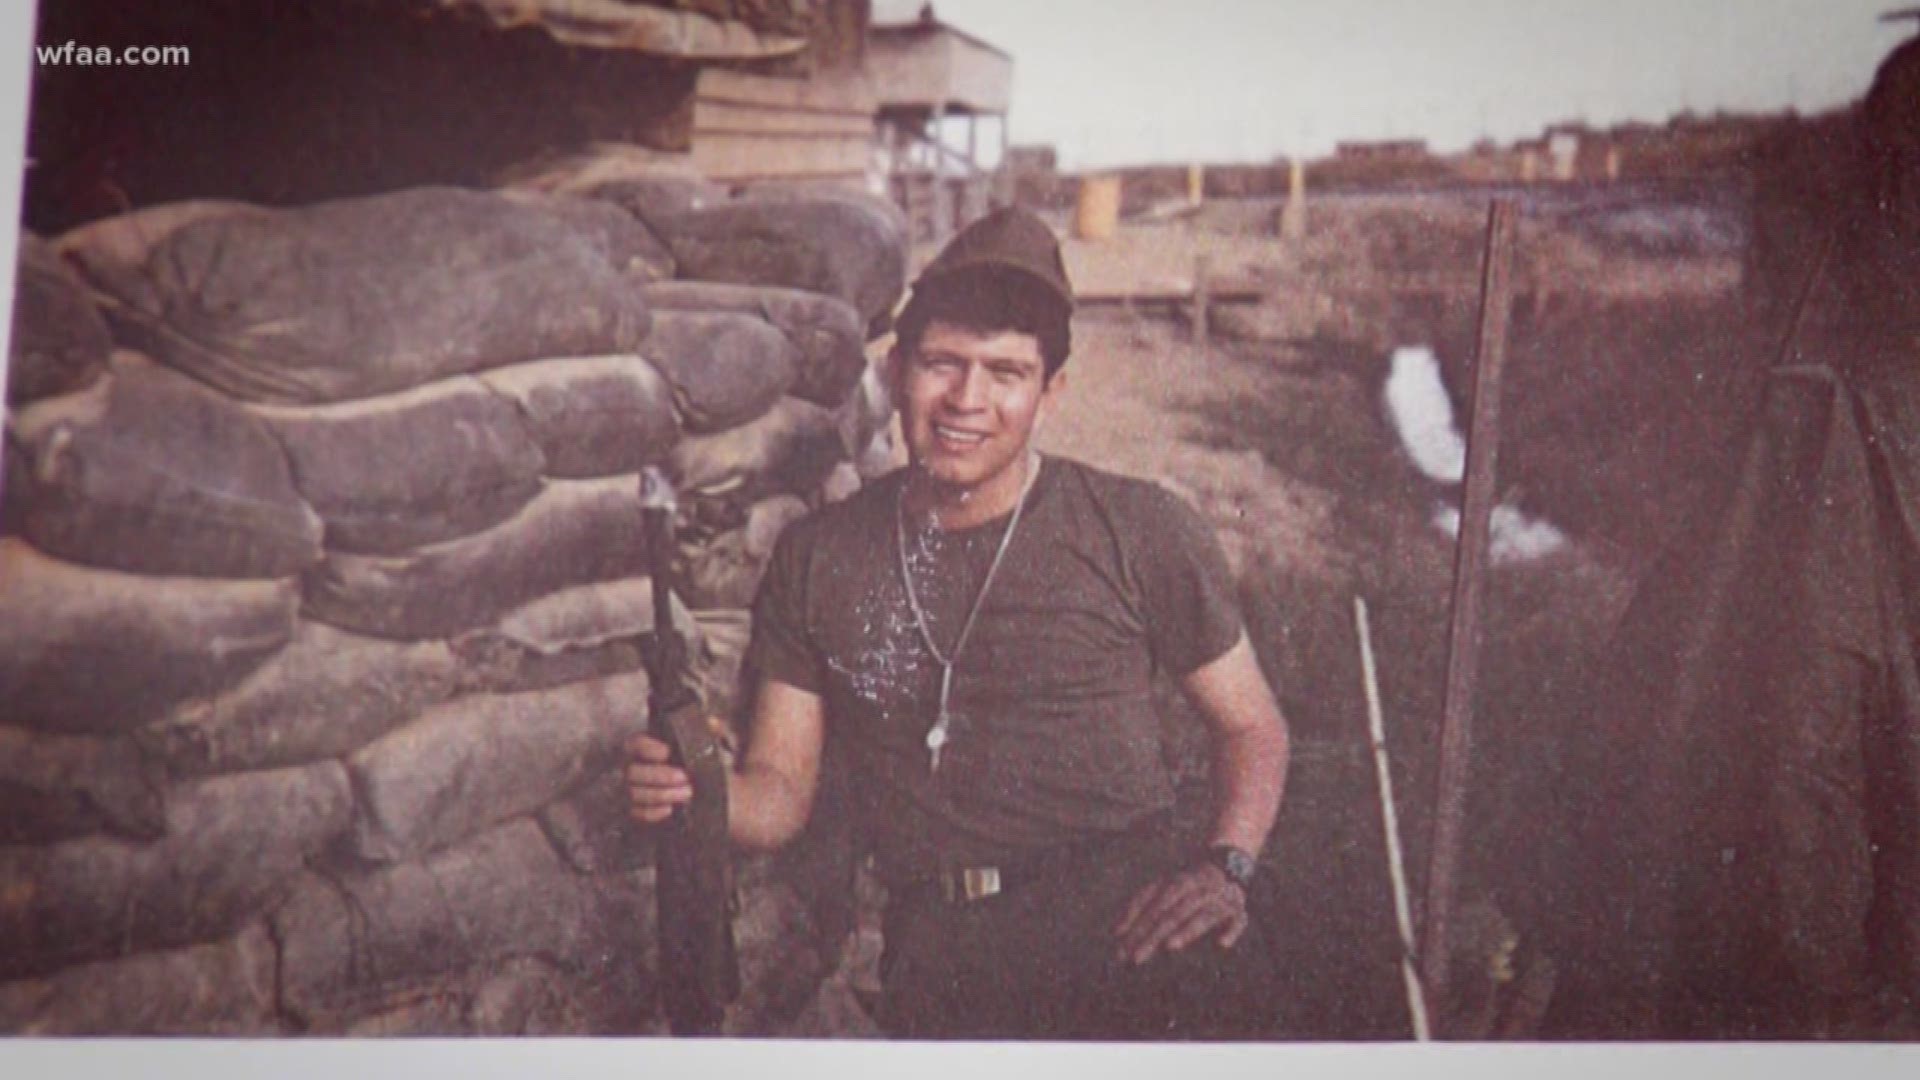 Eddie Reyes is a highly decorated veteran who lost friends and family in the Vietnam conflict. 